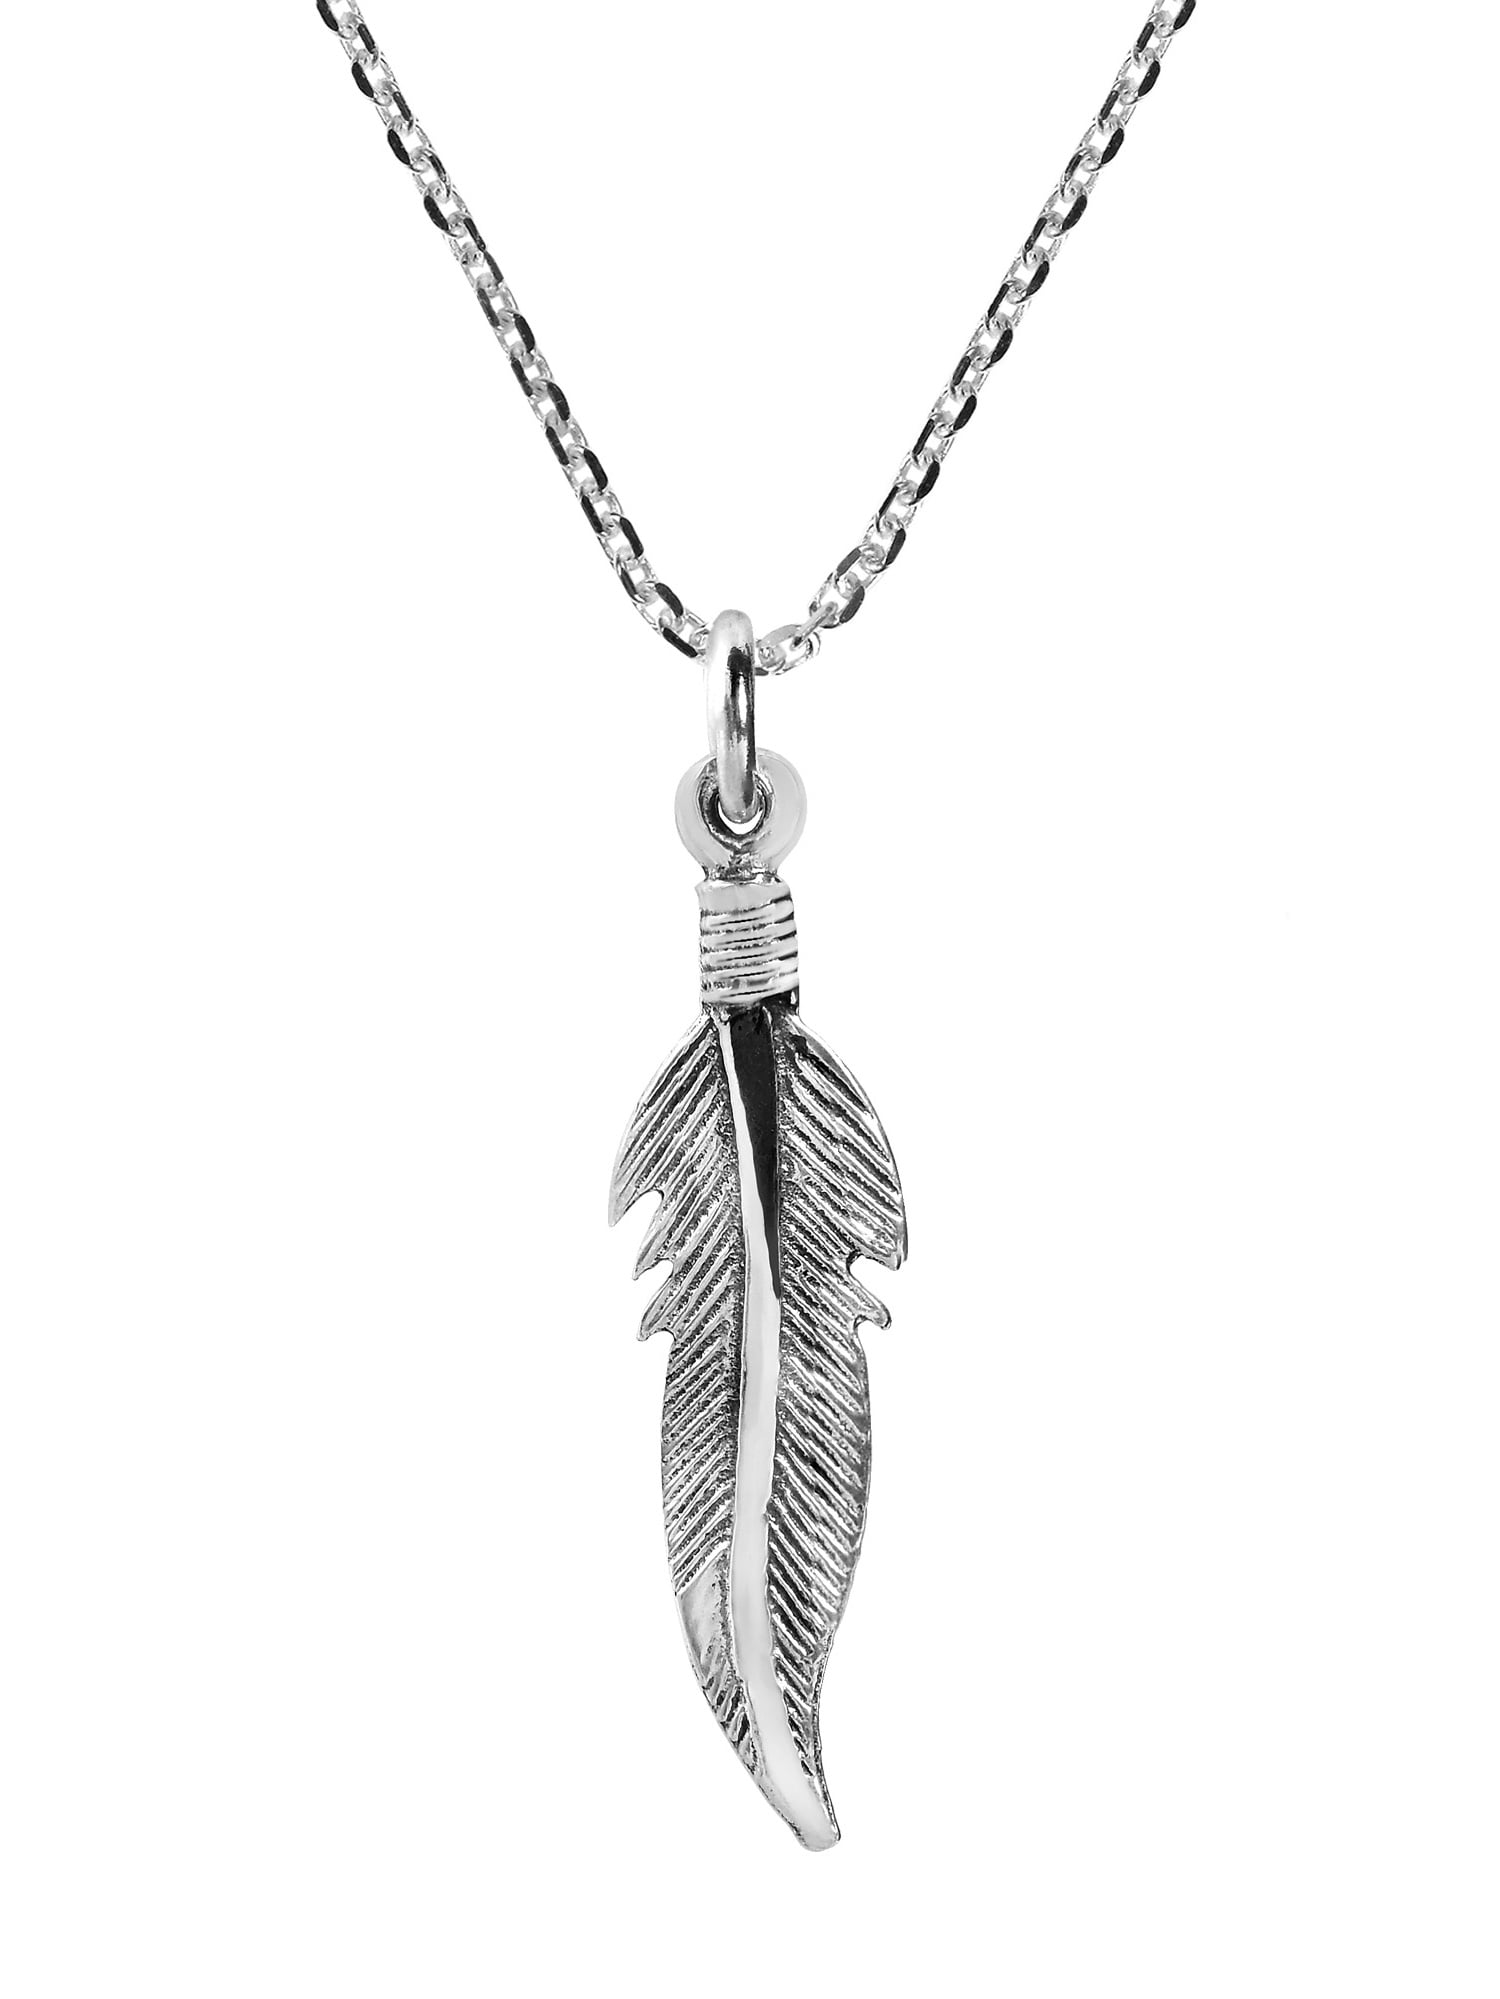 Luxury New Jewelry Feather Silver Charms Pendant For 925 Sterling Necklace Chain